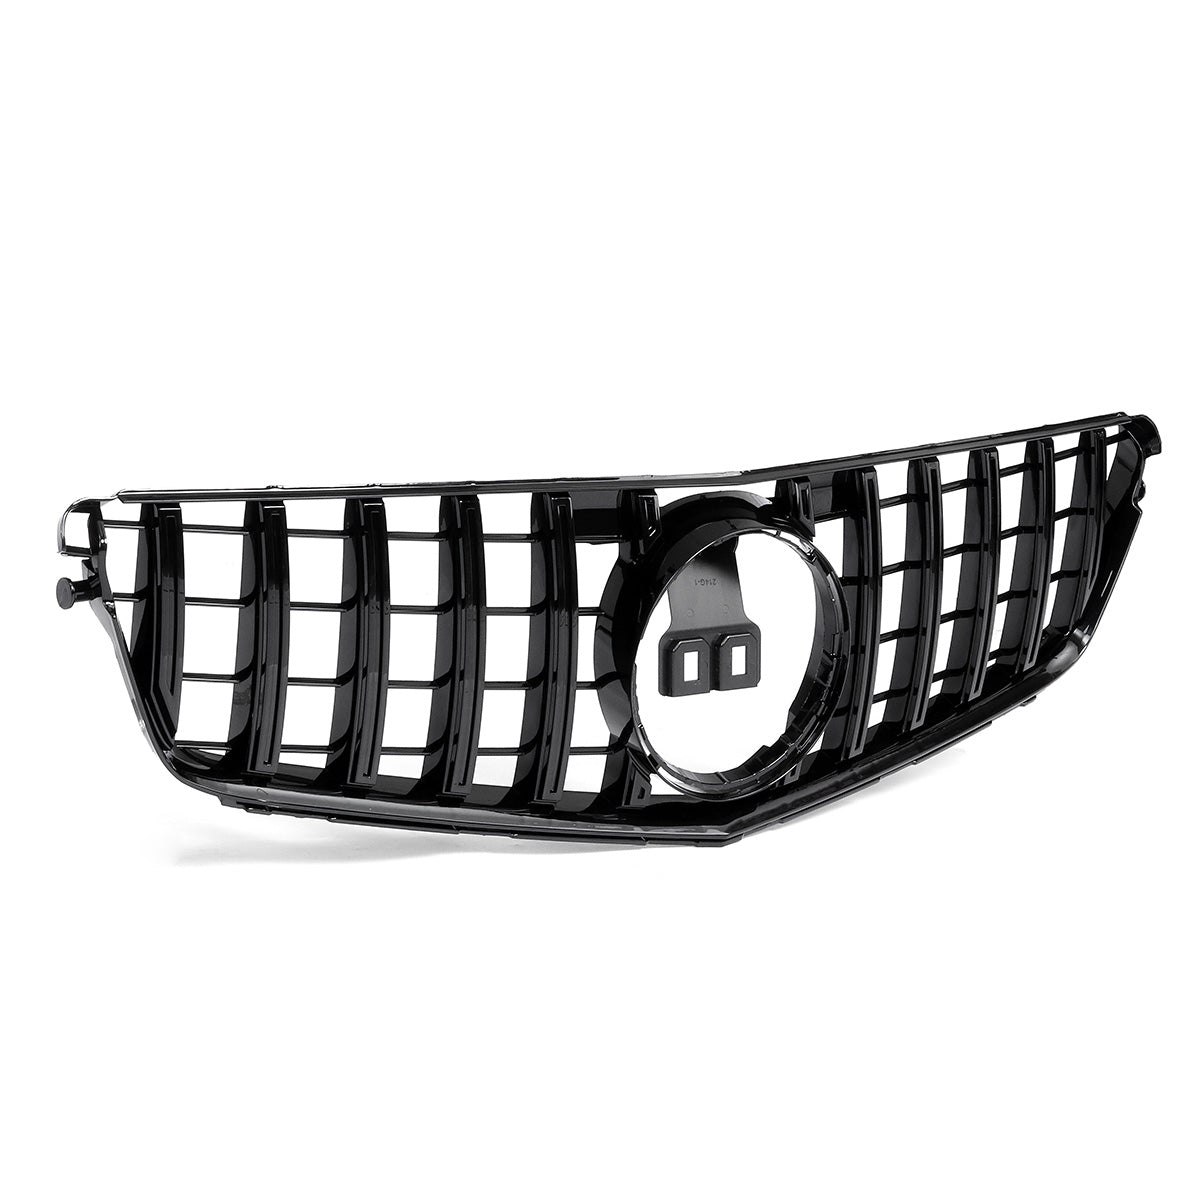 Black Car GTR Style Grille Front Bumper Grill Black for Mercedes Benz C-Class W204  2008-2014